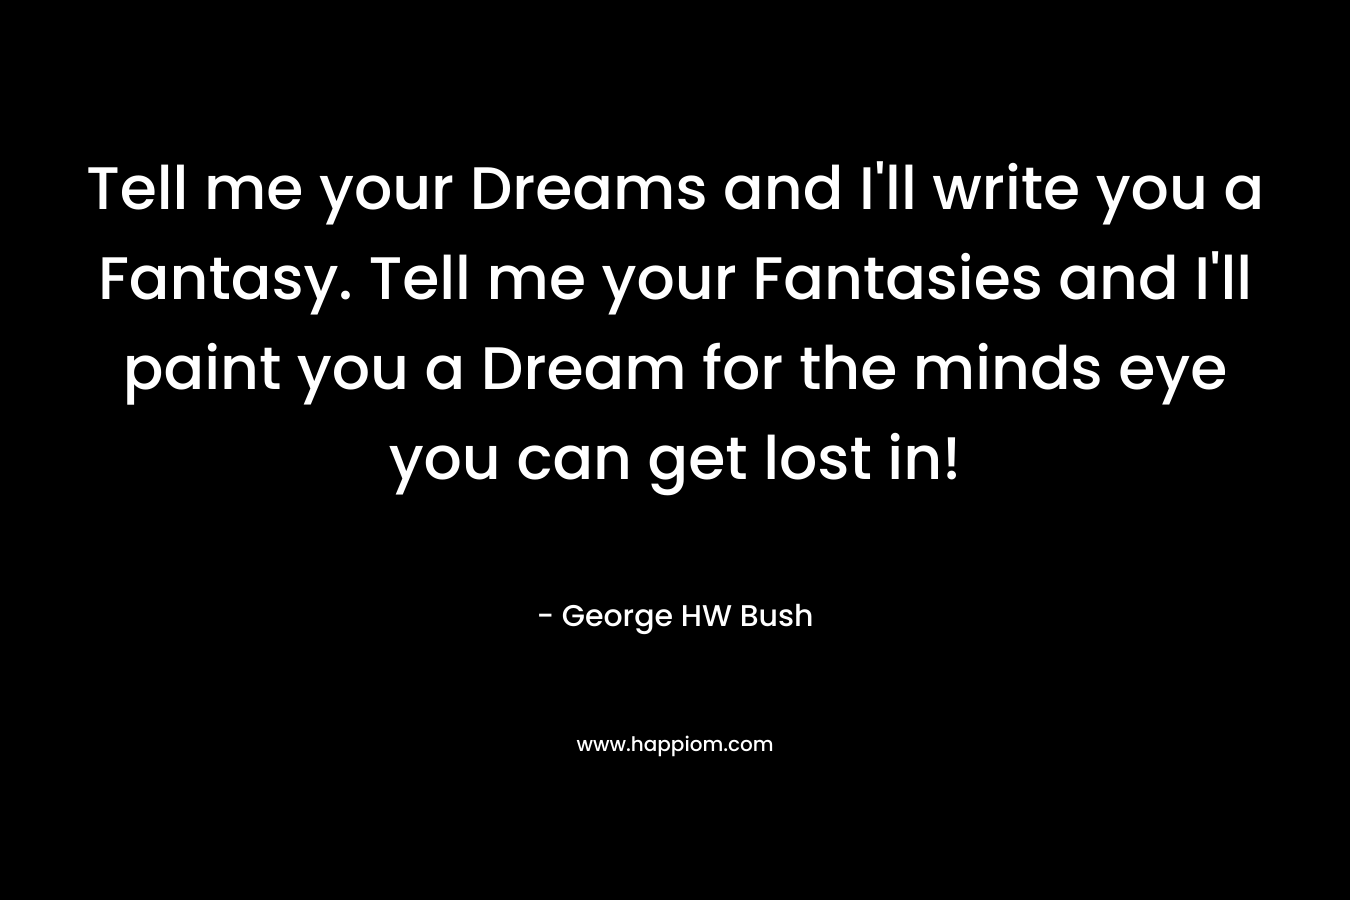 Tell me your Dreams and I’ll write you a Fantasy. Tell me your Fantasies and I’ll paint you a Dream for the minds eye you can get lost in! – George HW Bush